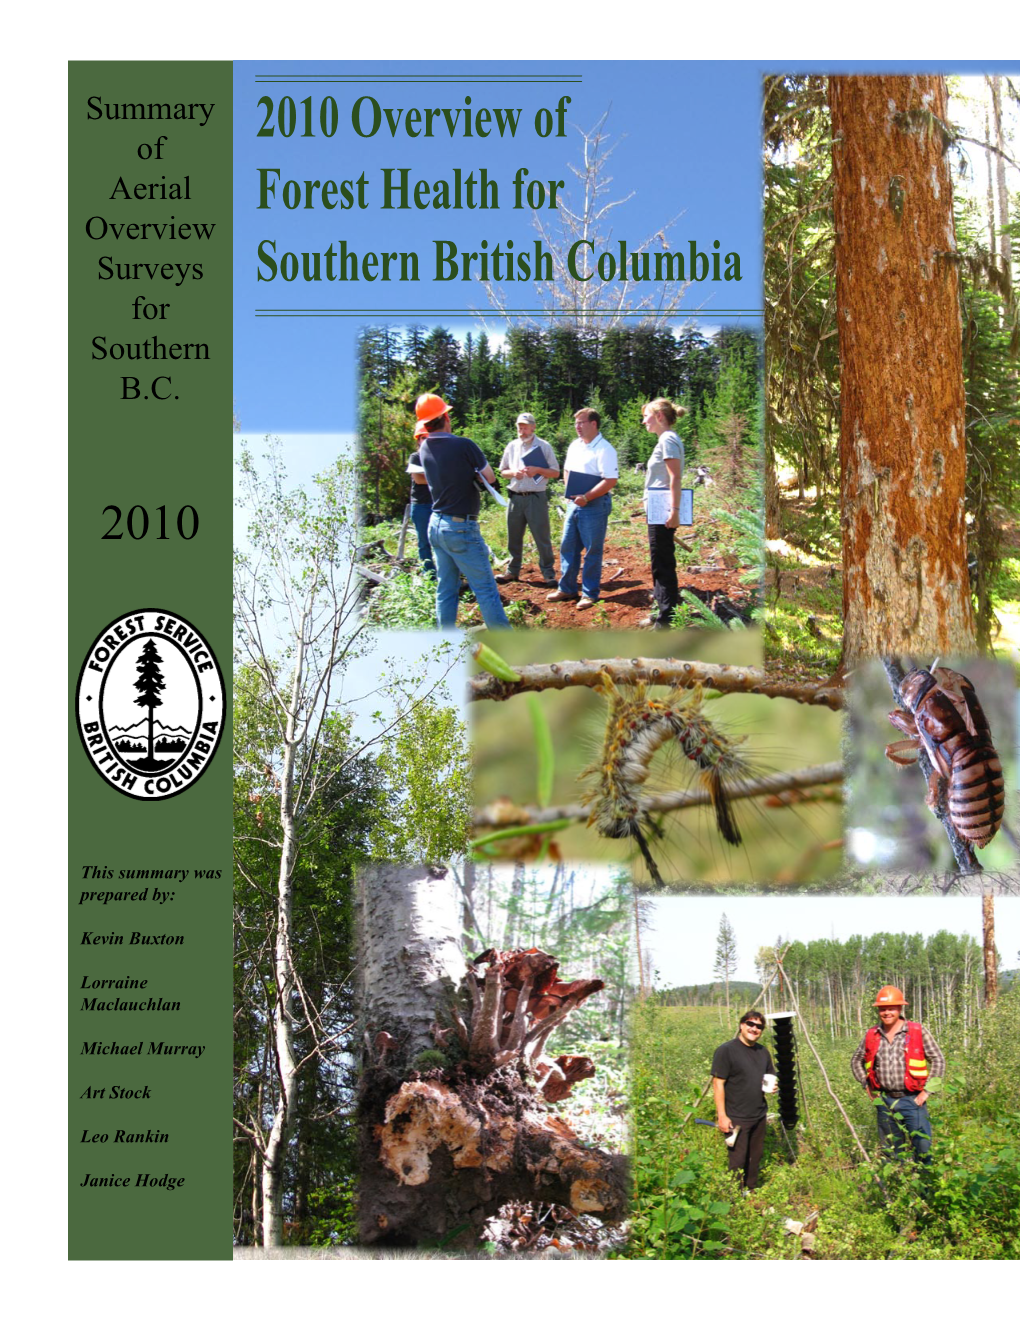 2010 Overview of Forest Health for Southern British Columbia